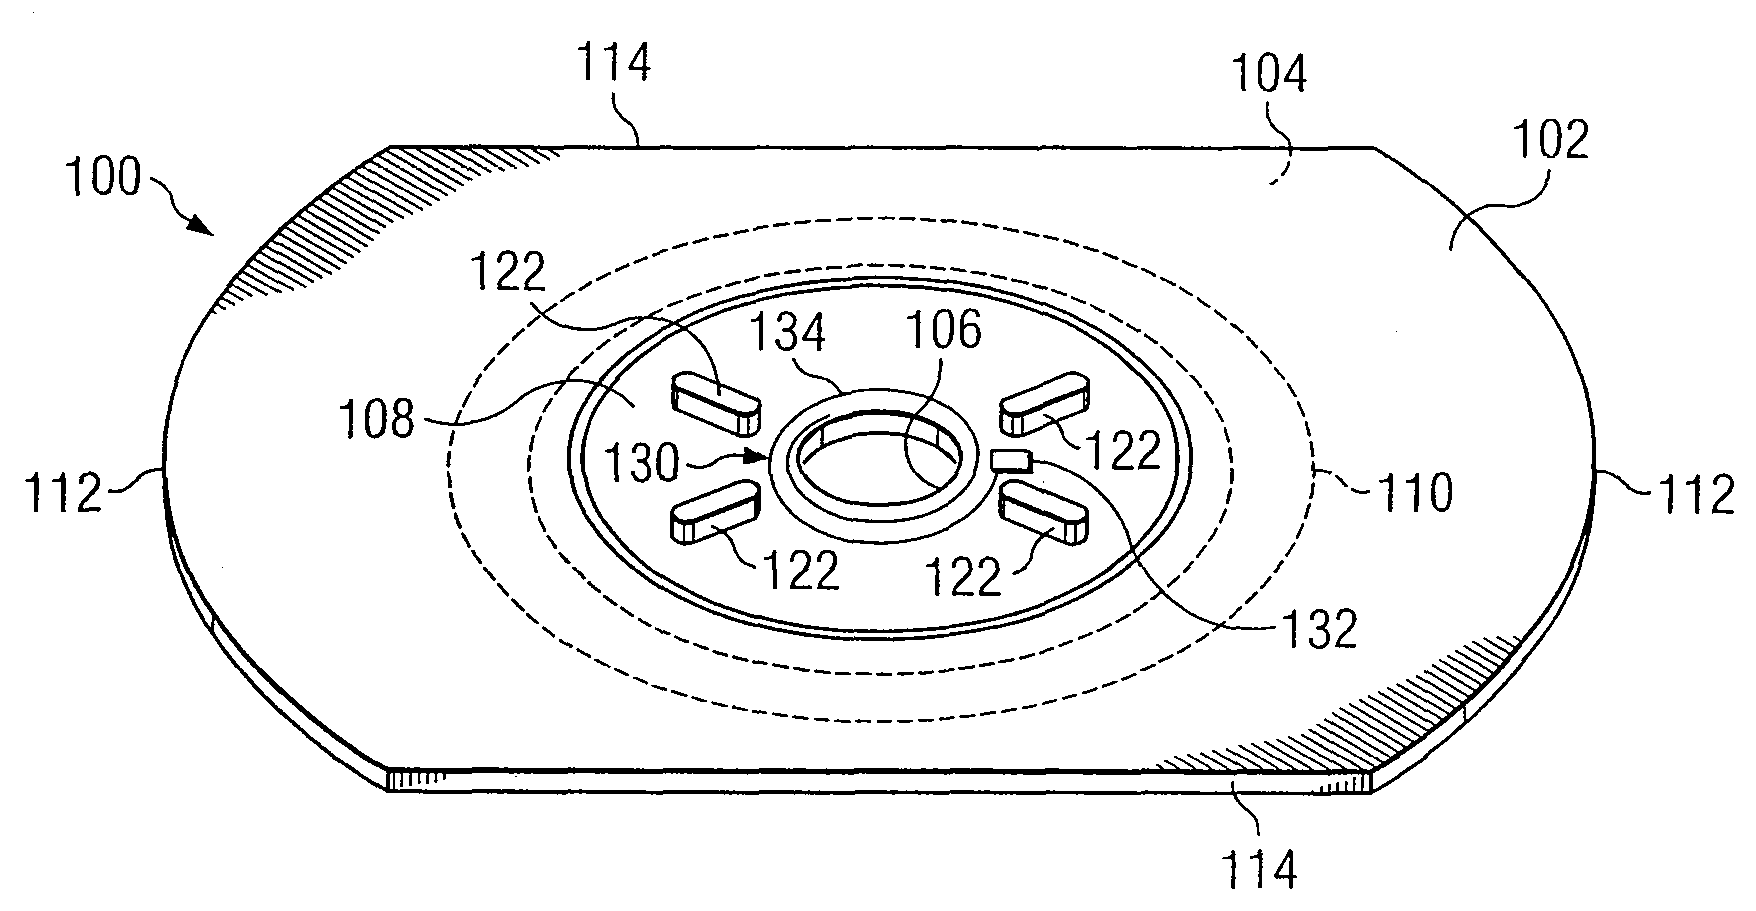 Thin optical disc having remote reading capability